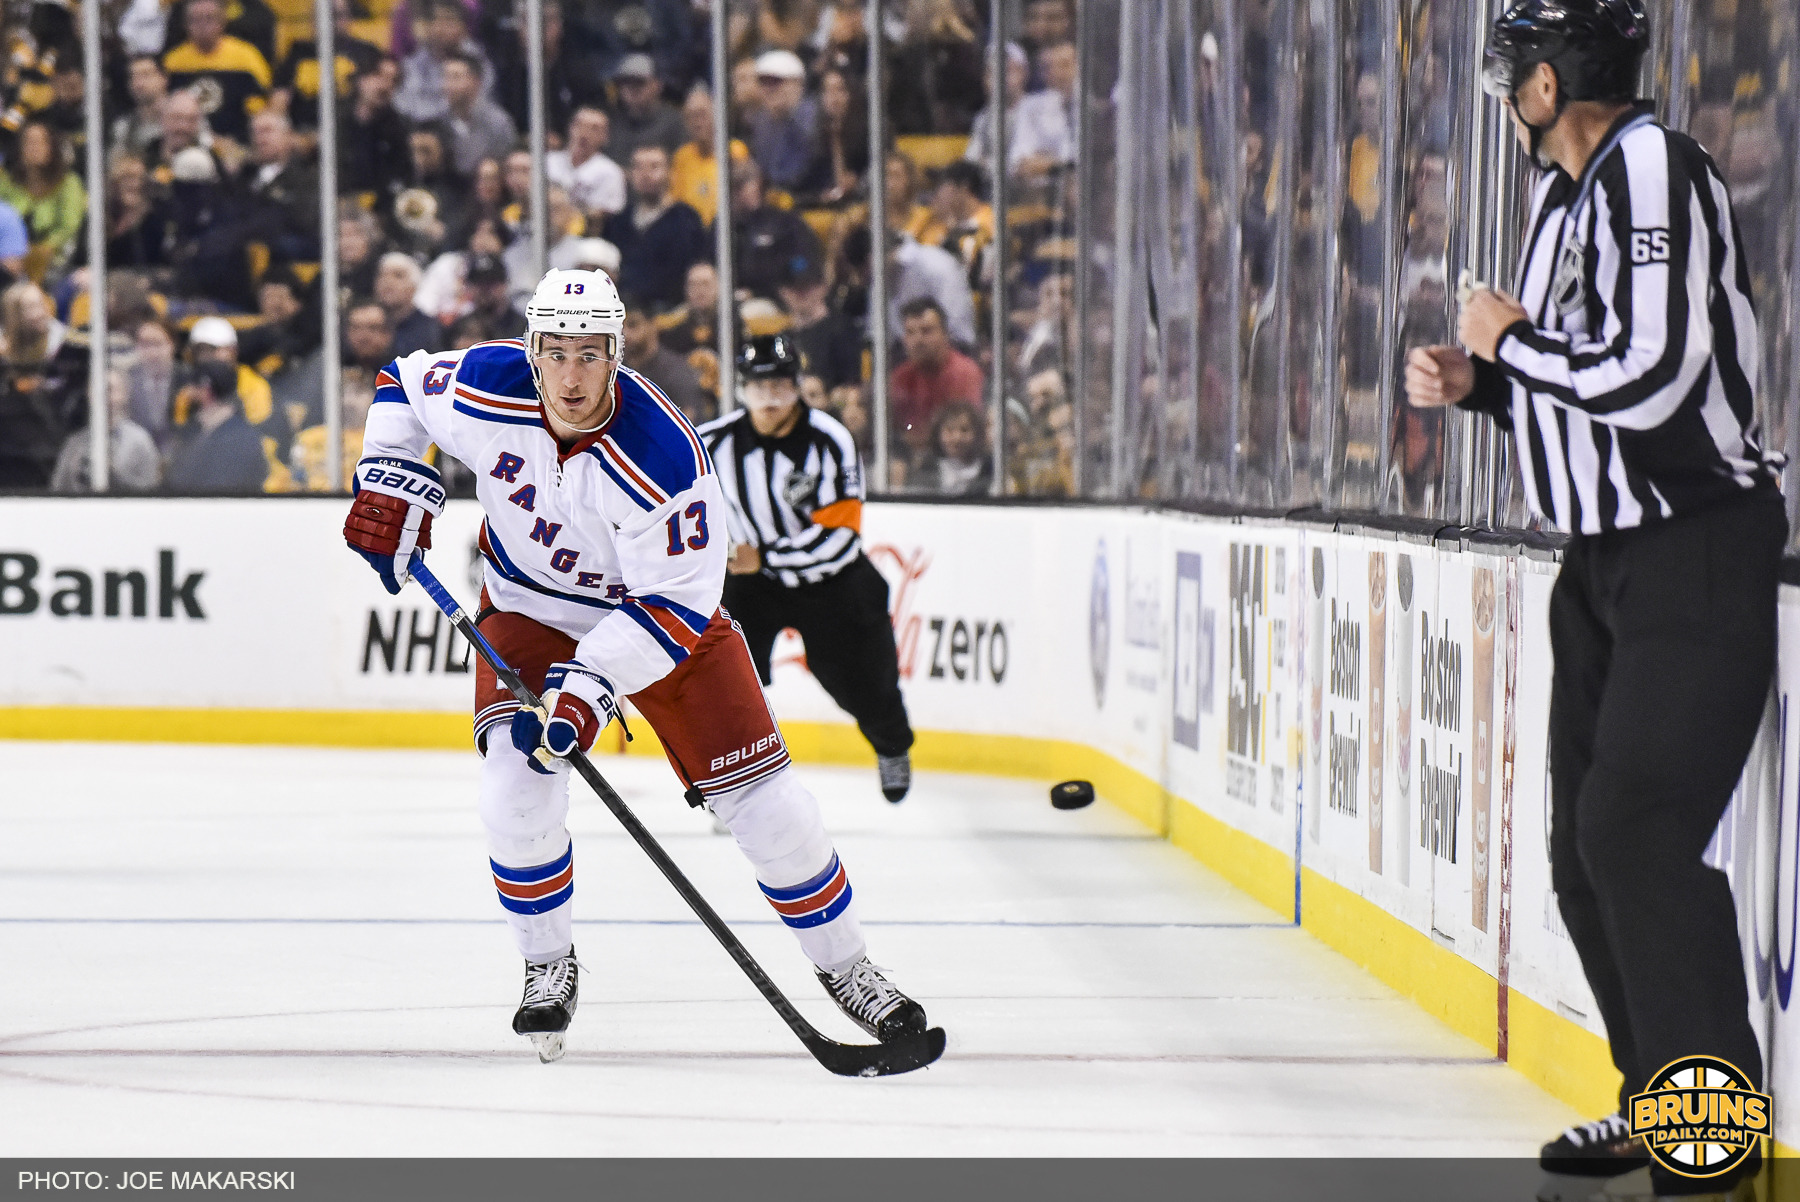 Kevin and Jimmy Hayes will battle for family bragging rights when the Bruins and Rangers meet the day after Thanksgiving. (Photos by Joe Makarski/Bruins Daily)